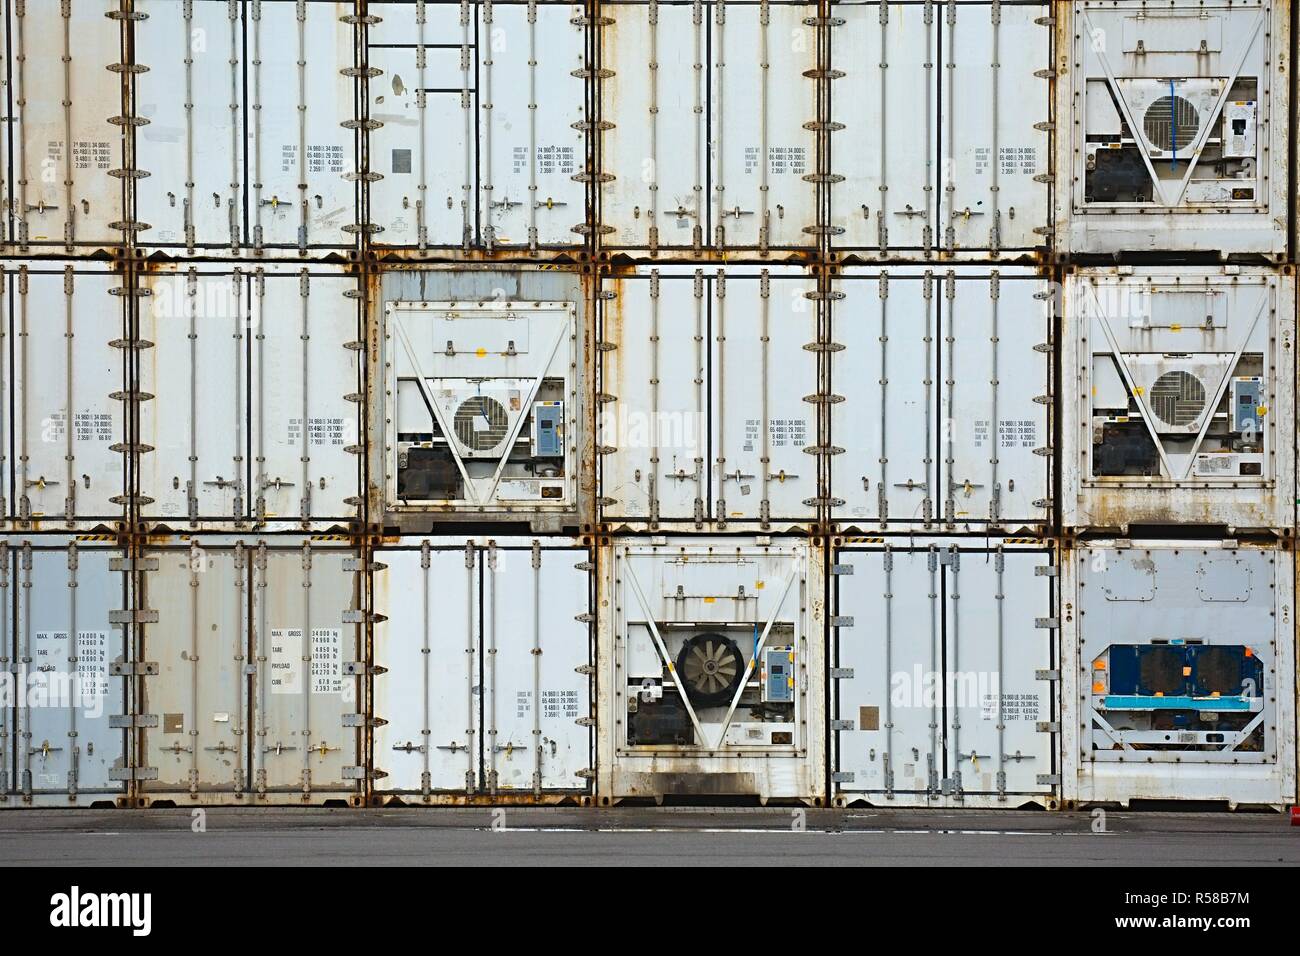 Stacked Refigerated Containers Stock Photo